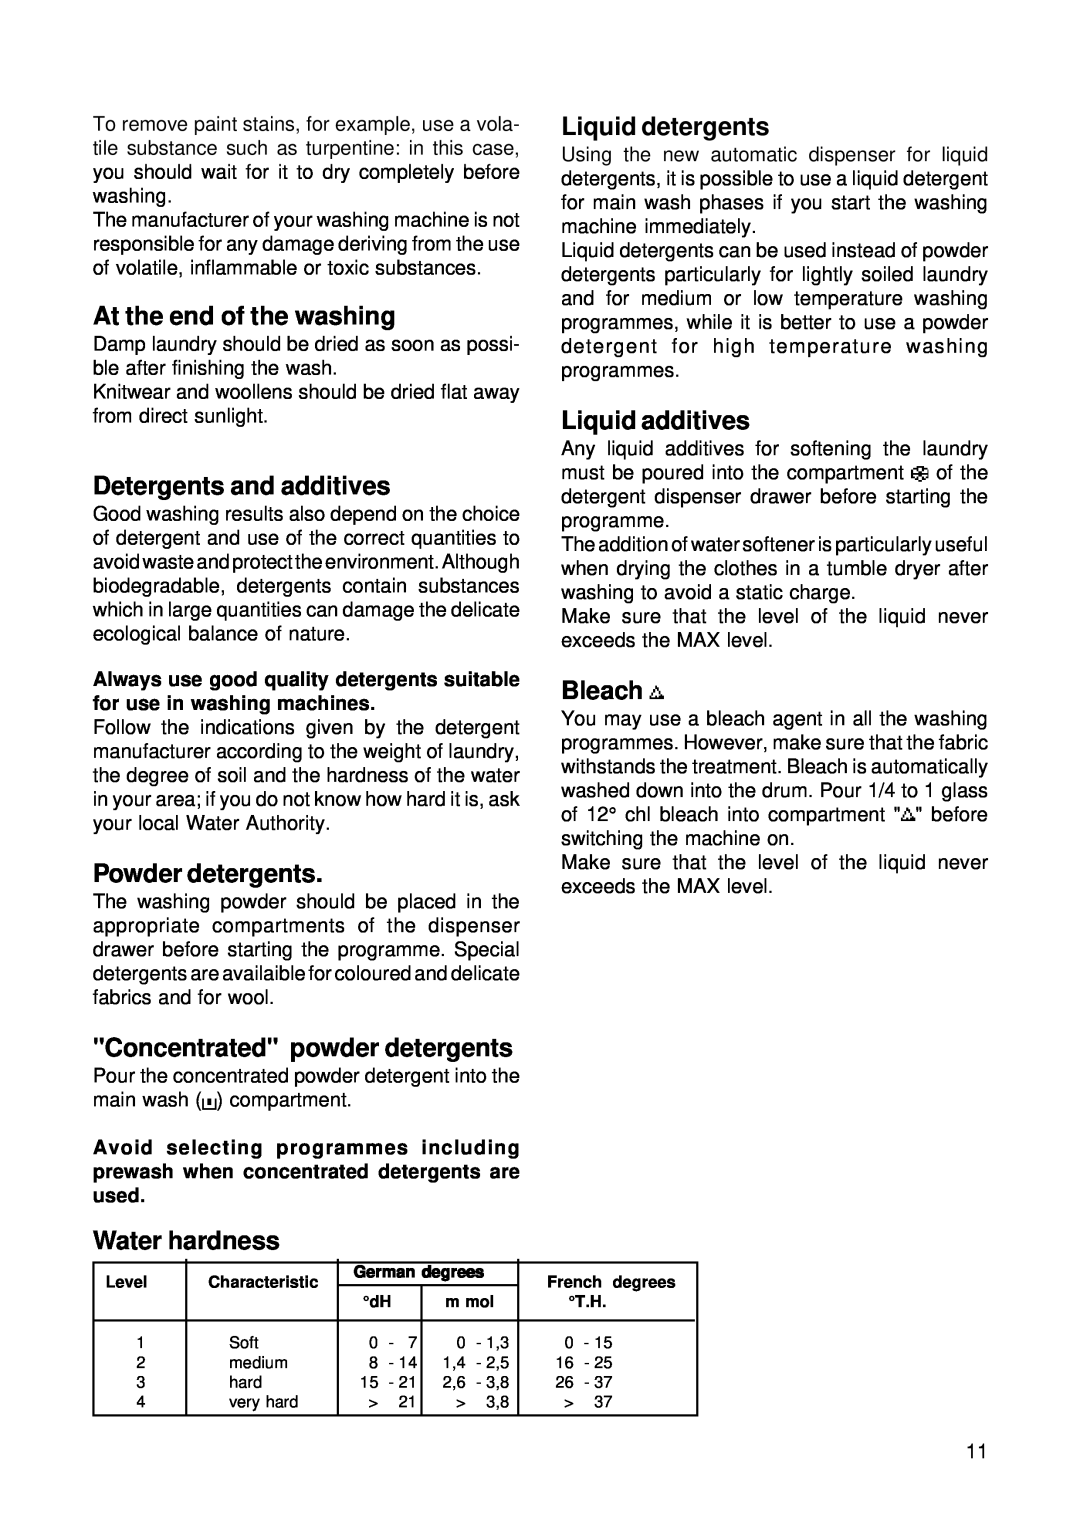 Zanussi TL 553 C manual At the end of the washing, Detergents and additives, Powder detergents, Liquid detergents, Bleach 